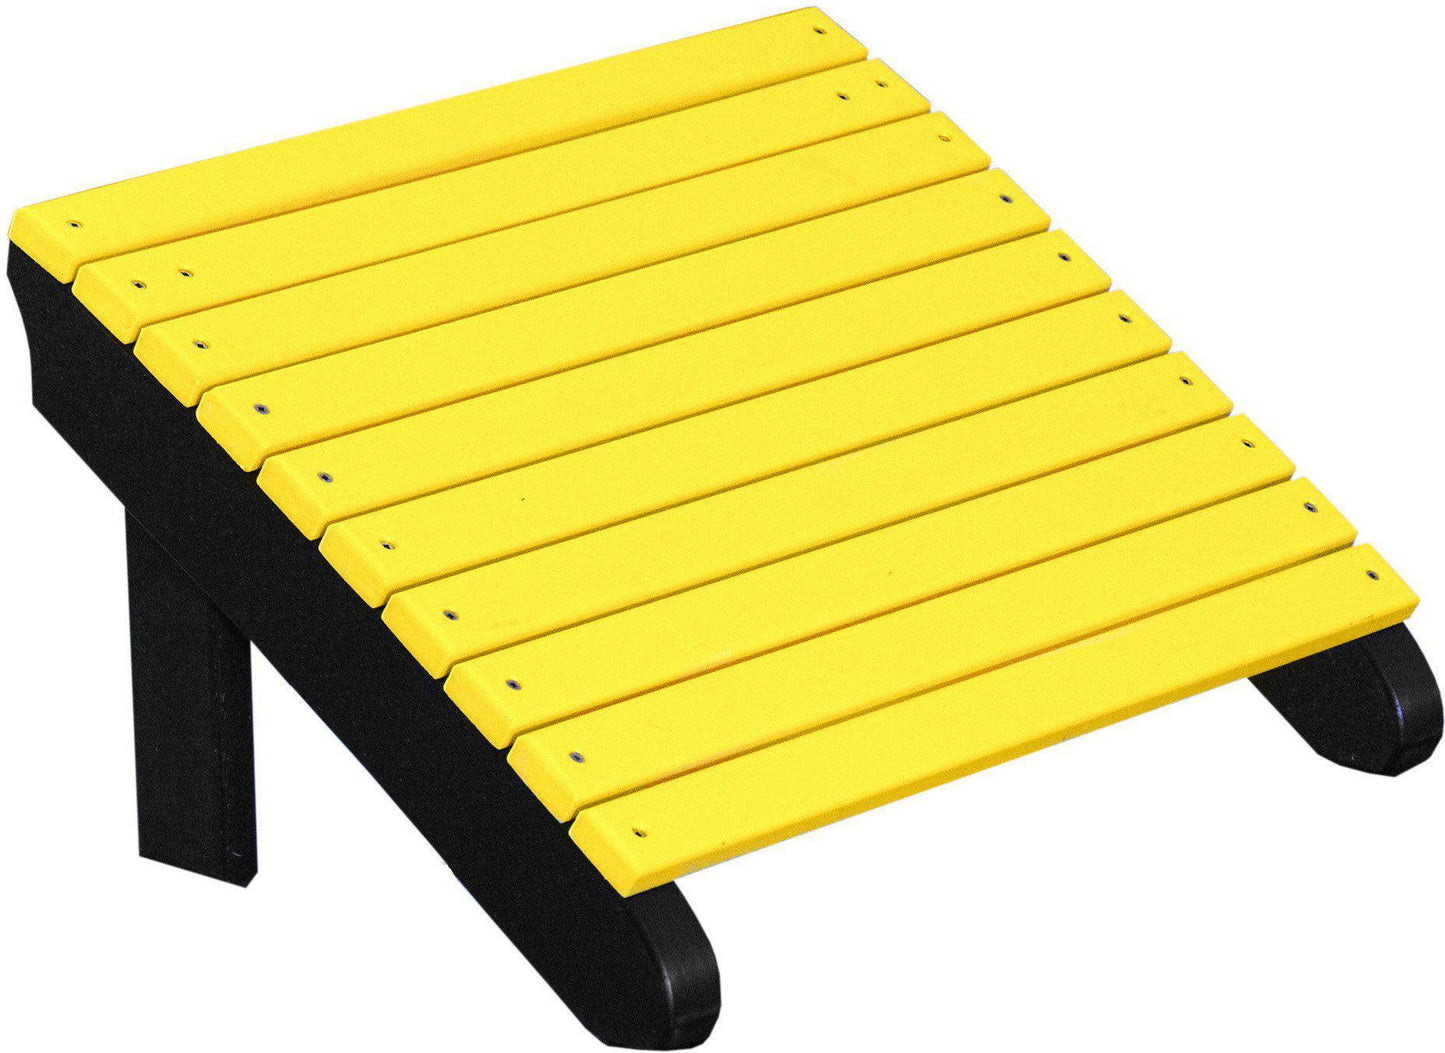 LuxCraft Recycled Plastic Deluxe Adirondack Footrest - Yellow on Black